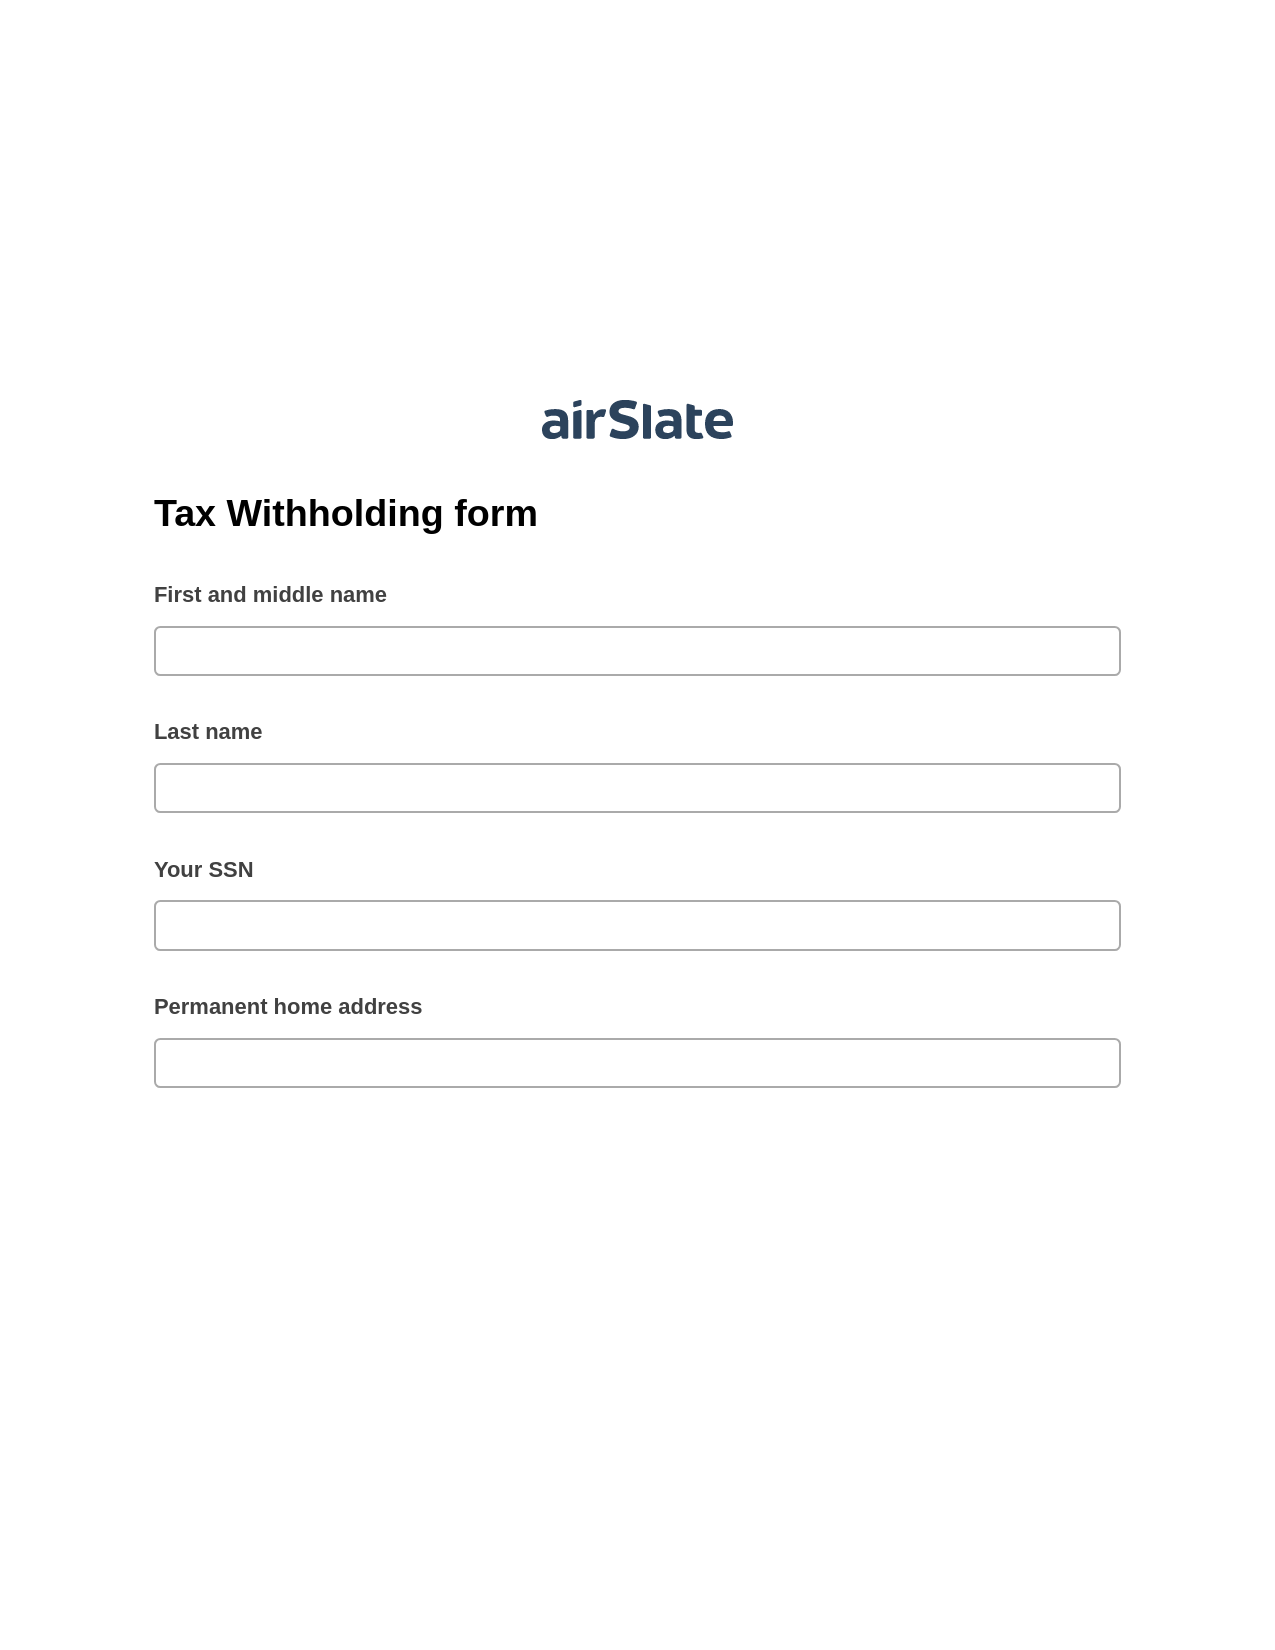 Multirole Tax Withholding form Pre-fill Slate from MS Dynamics 365 Records Bot, Google Calendar Bot, Dropbox Bot